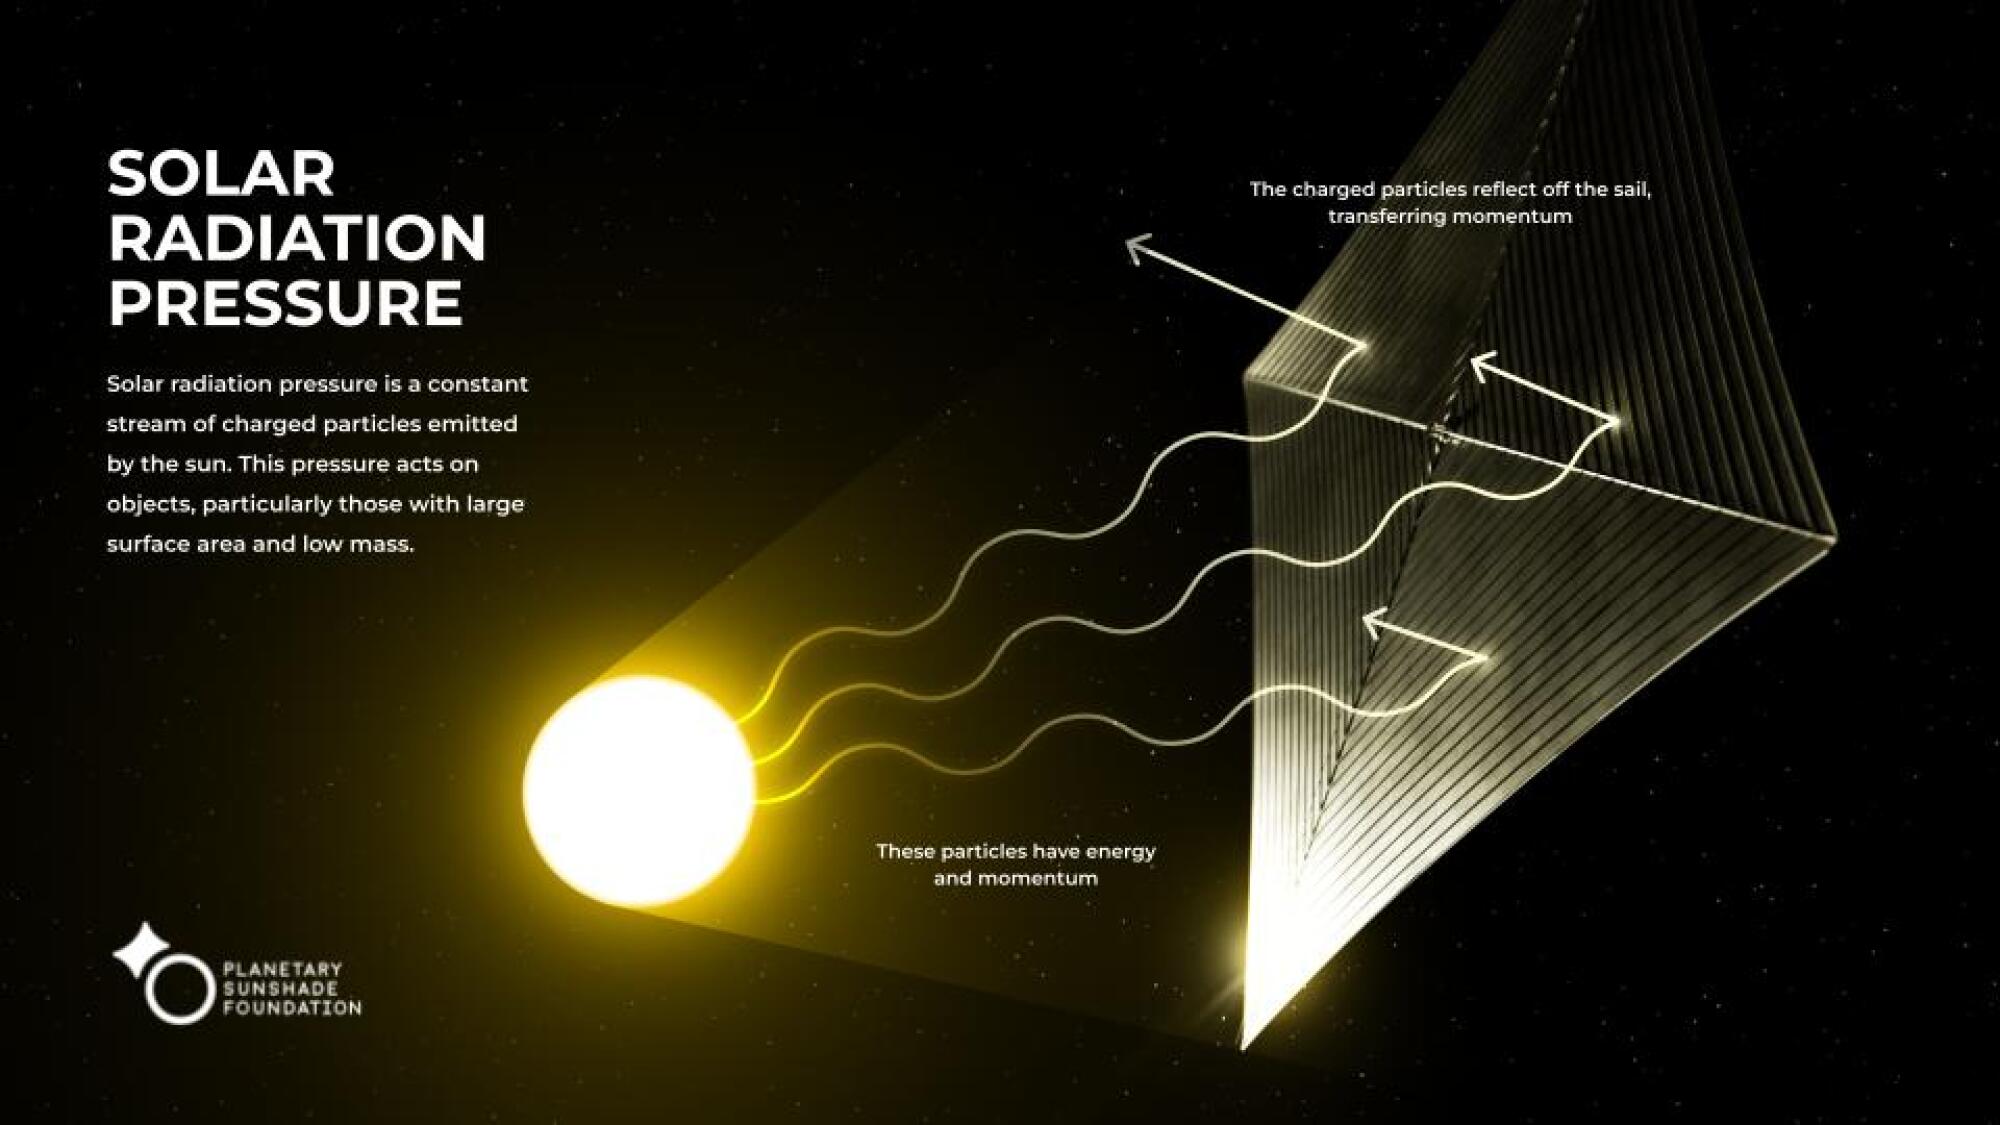 An illustration of the sun's rays being deflected by a giant sunshade